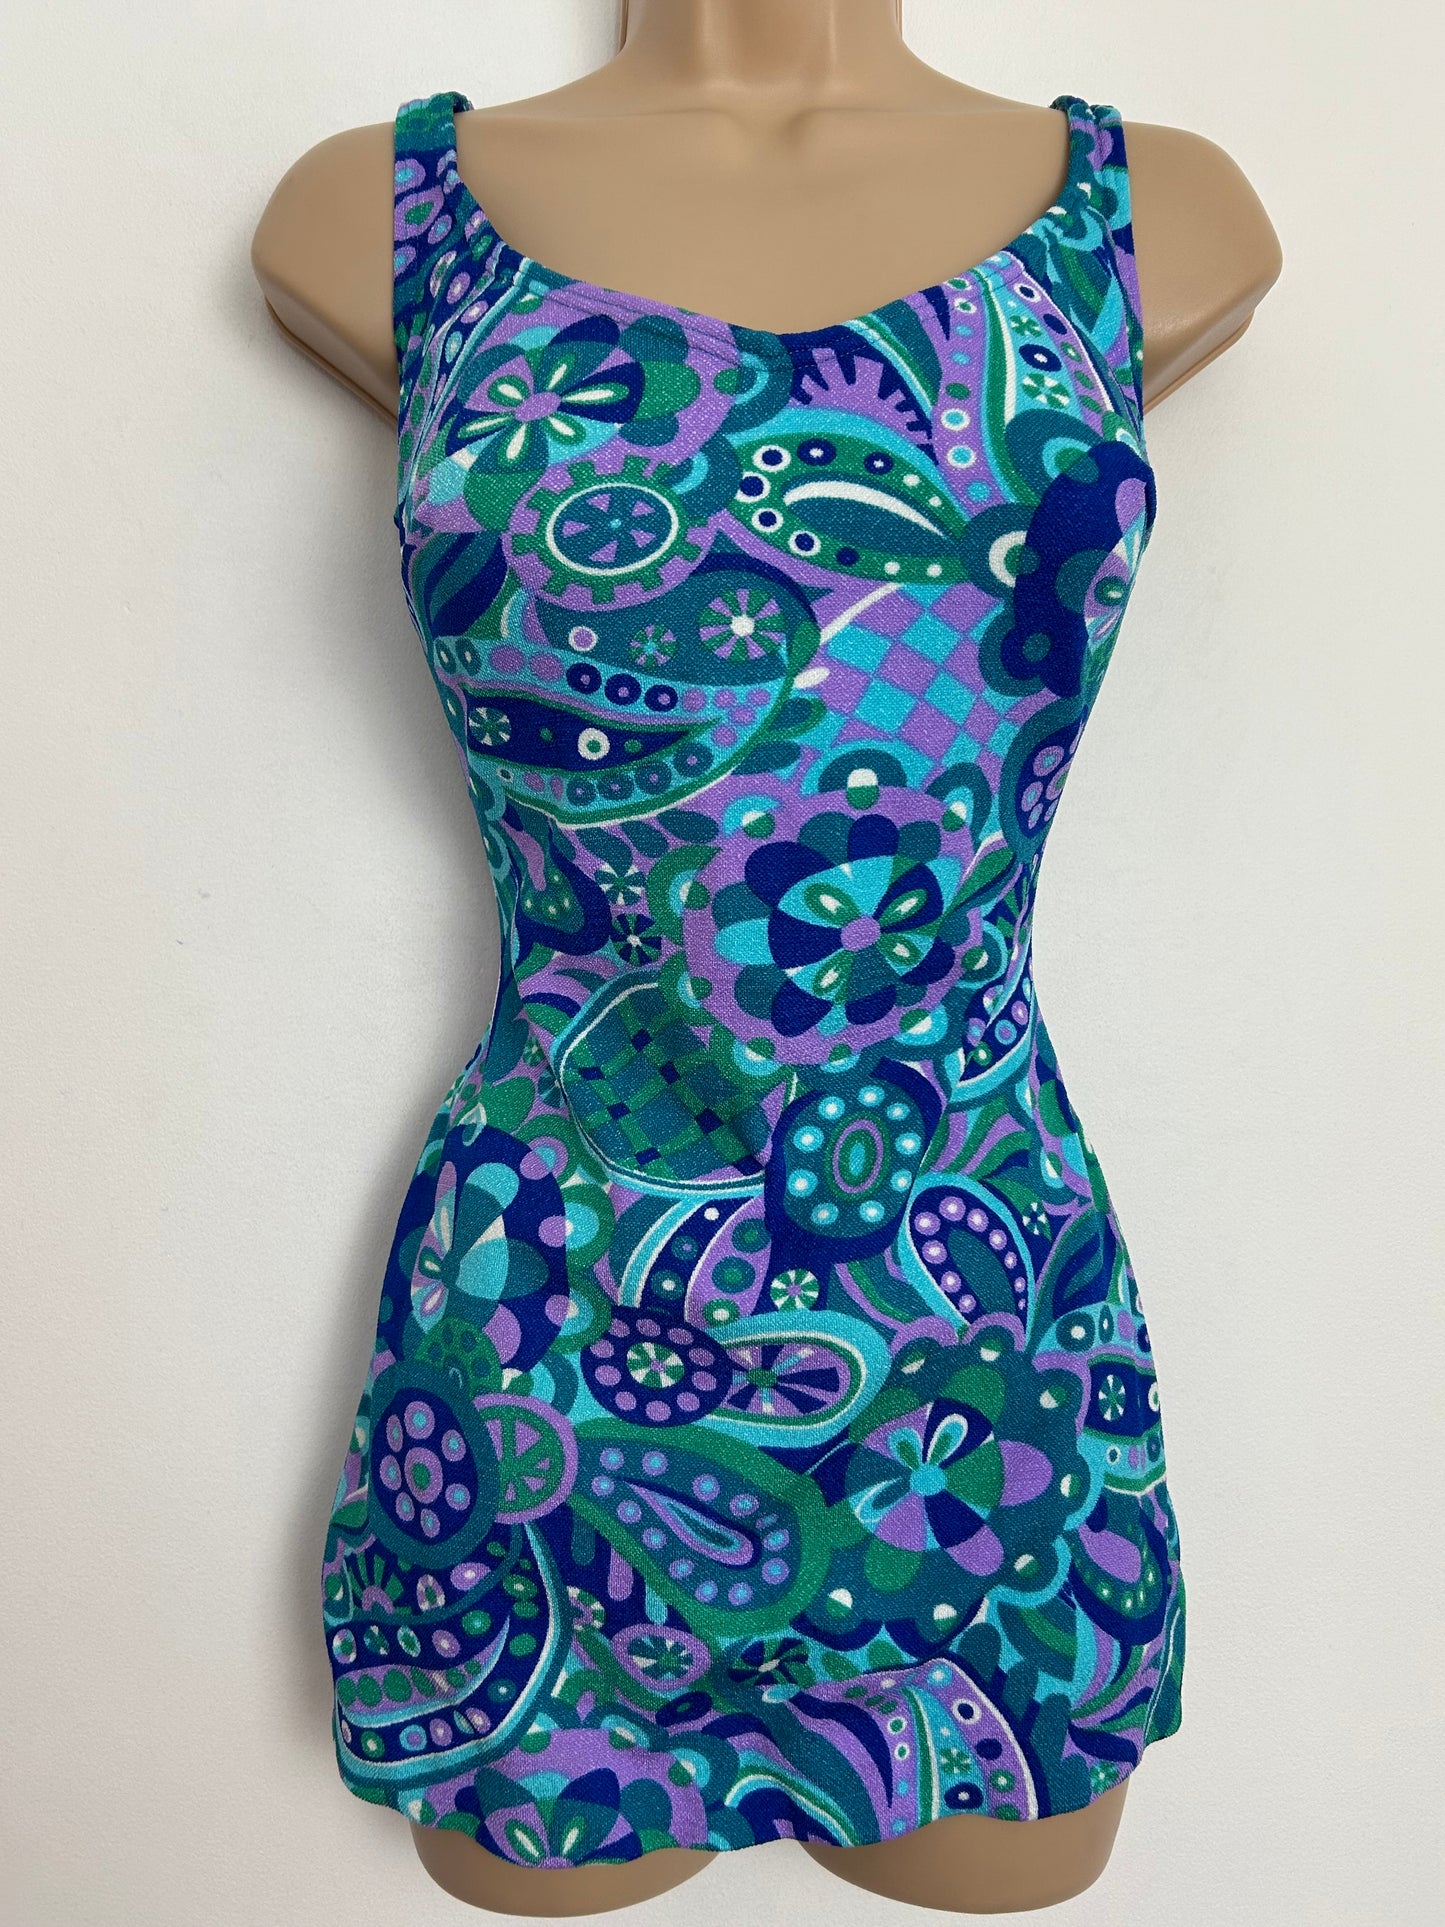 Vintage 1960s UK Size 14 Blue Green & Pink Psychedelic Floral Paisley Print Skirted Swimsuit